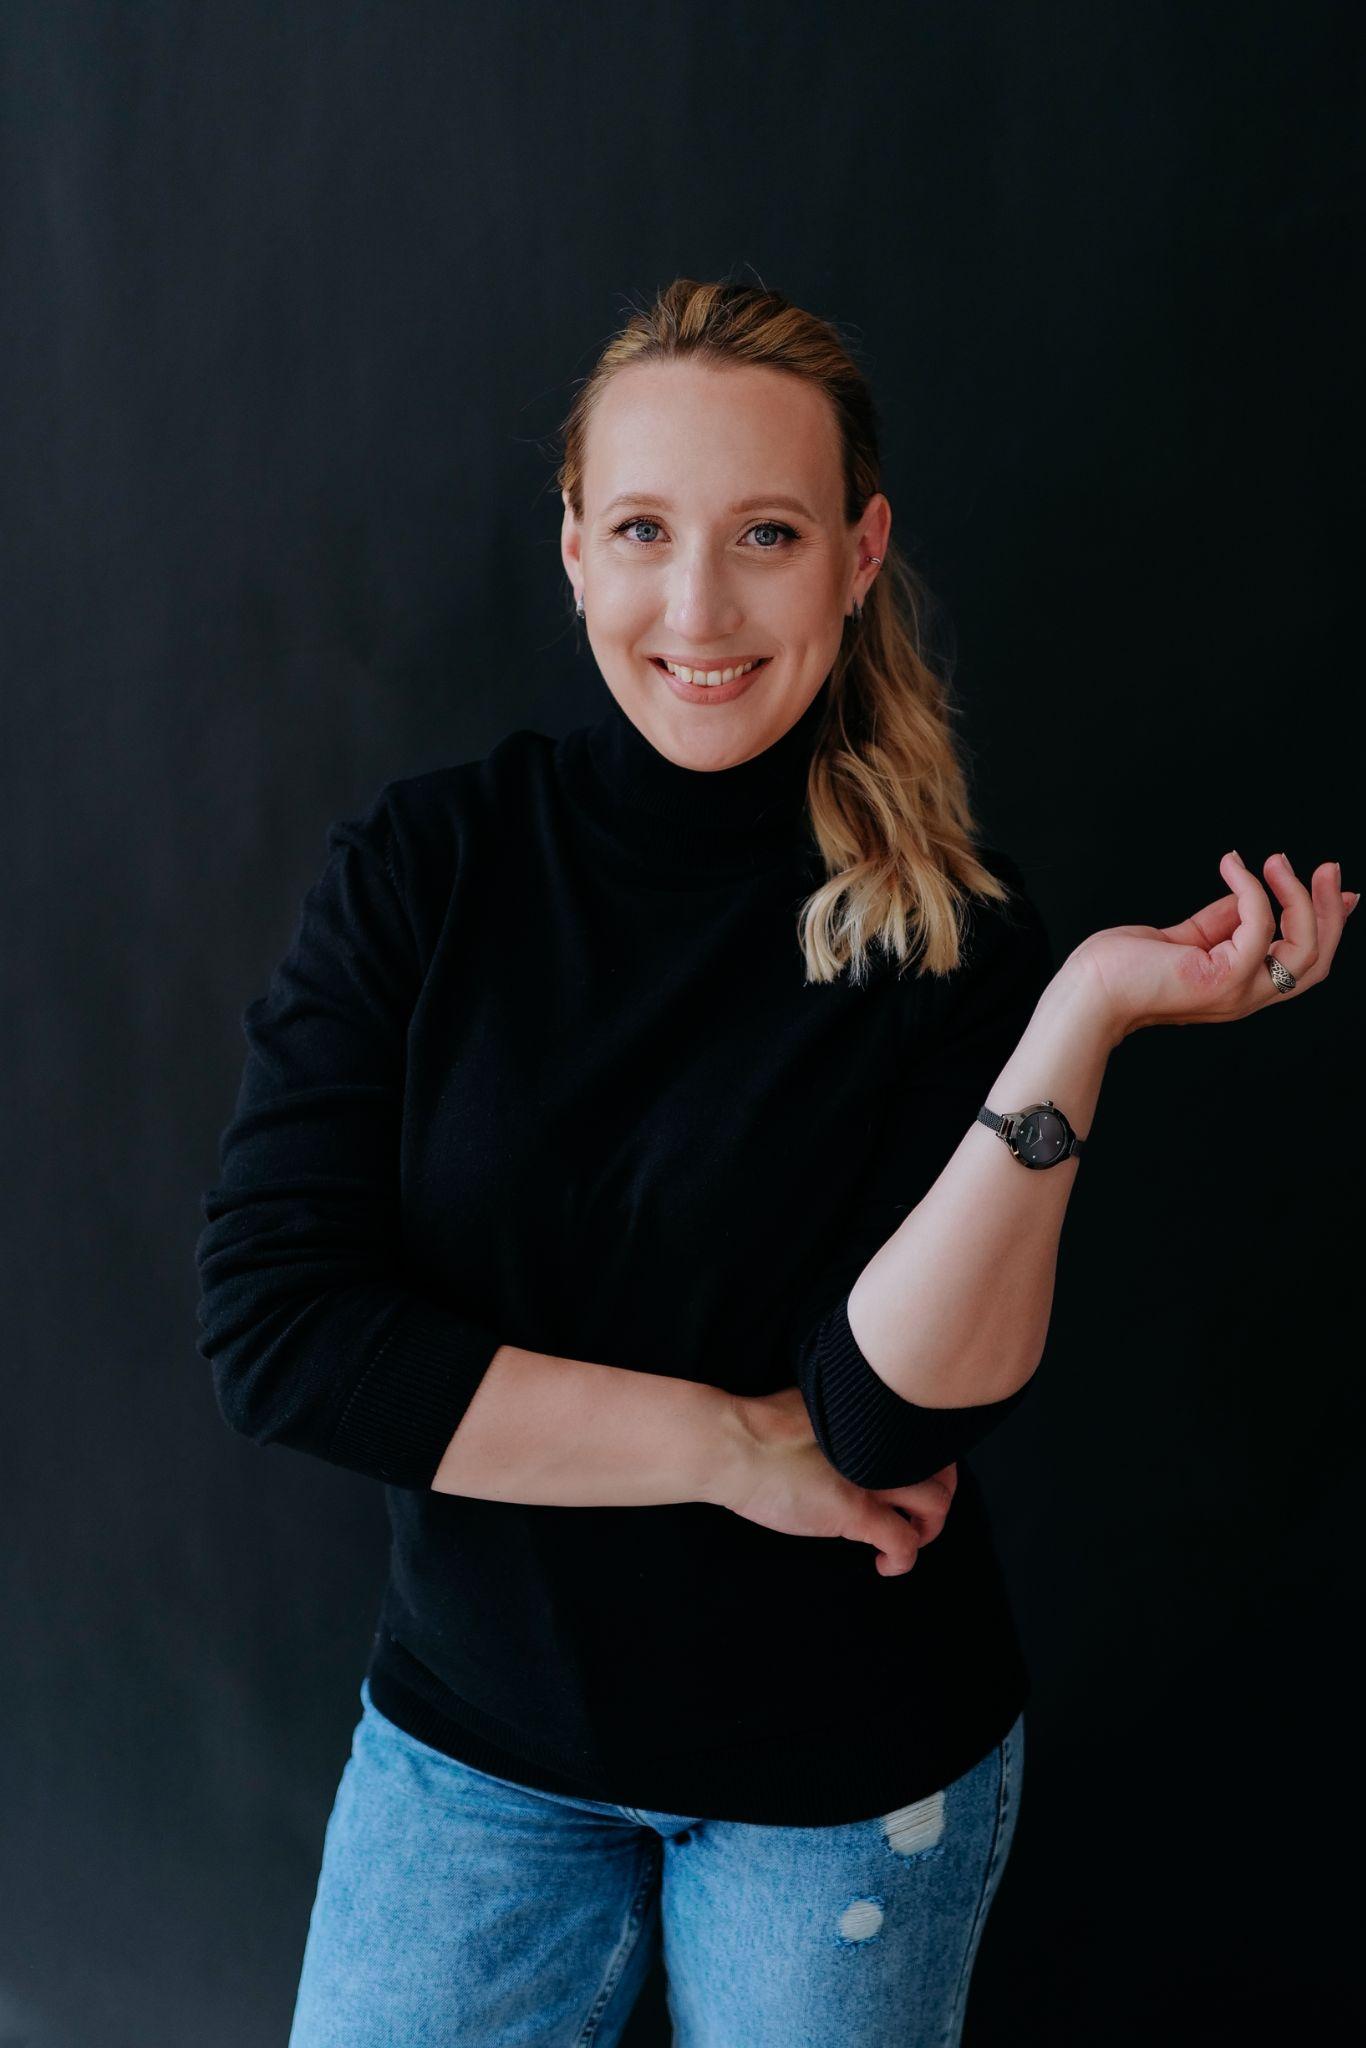 Anna Klevtcova recipient of the WildCats Professional Development Award wearing a black jumper and jeans standing in front of a dark background